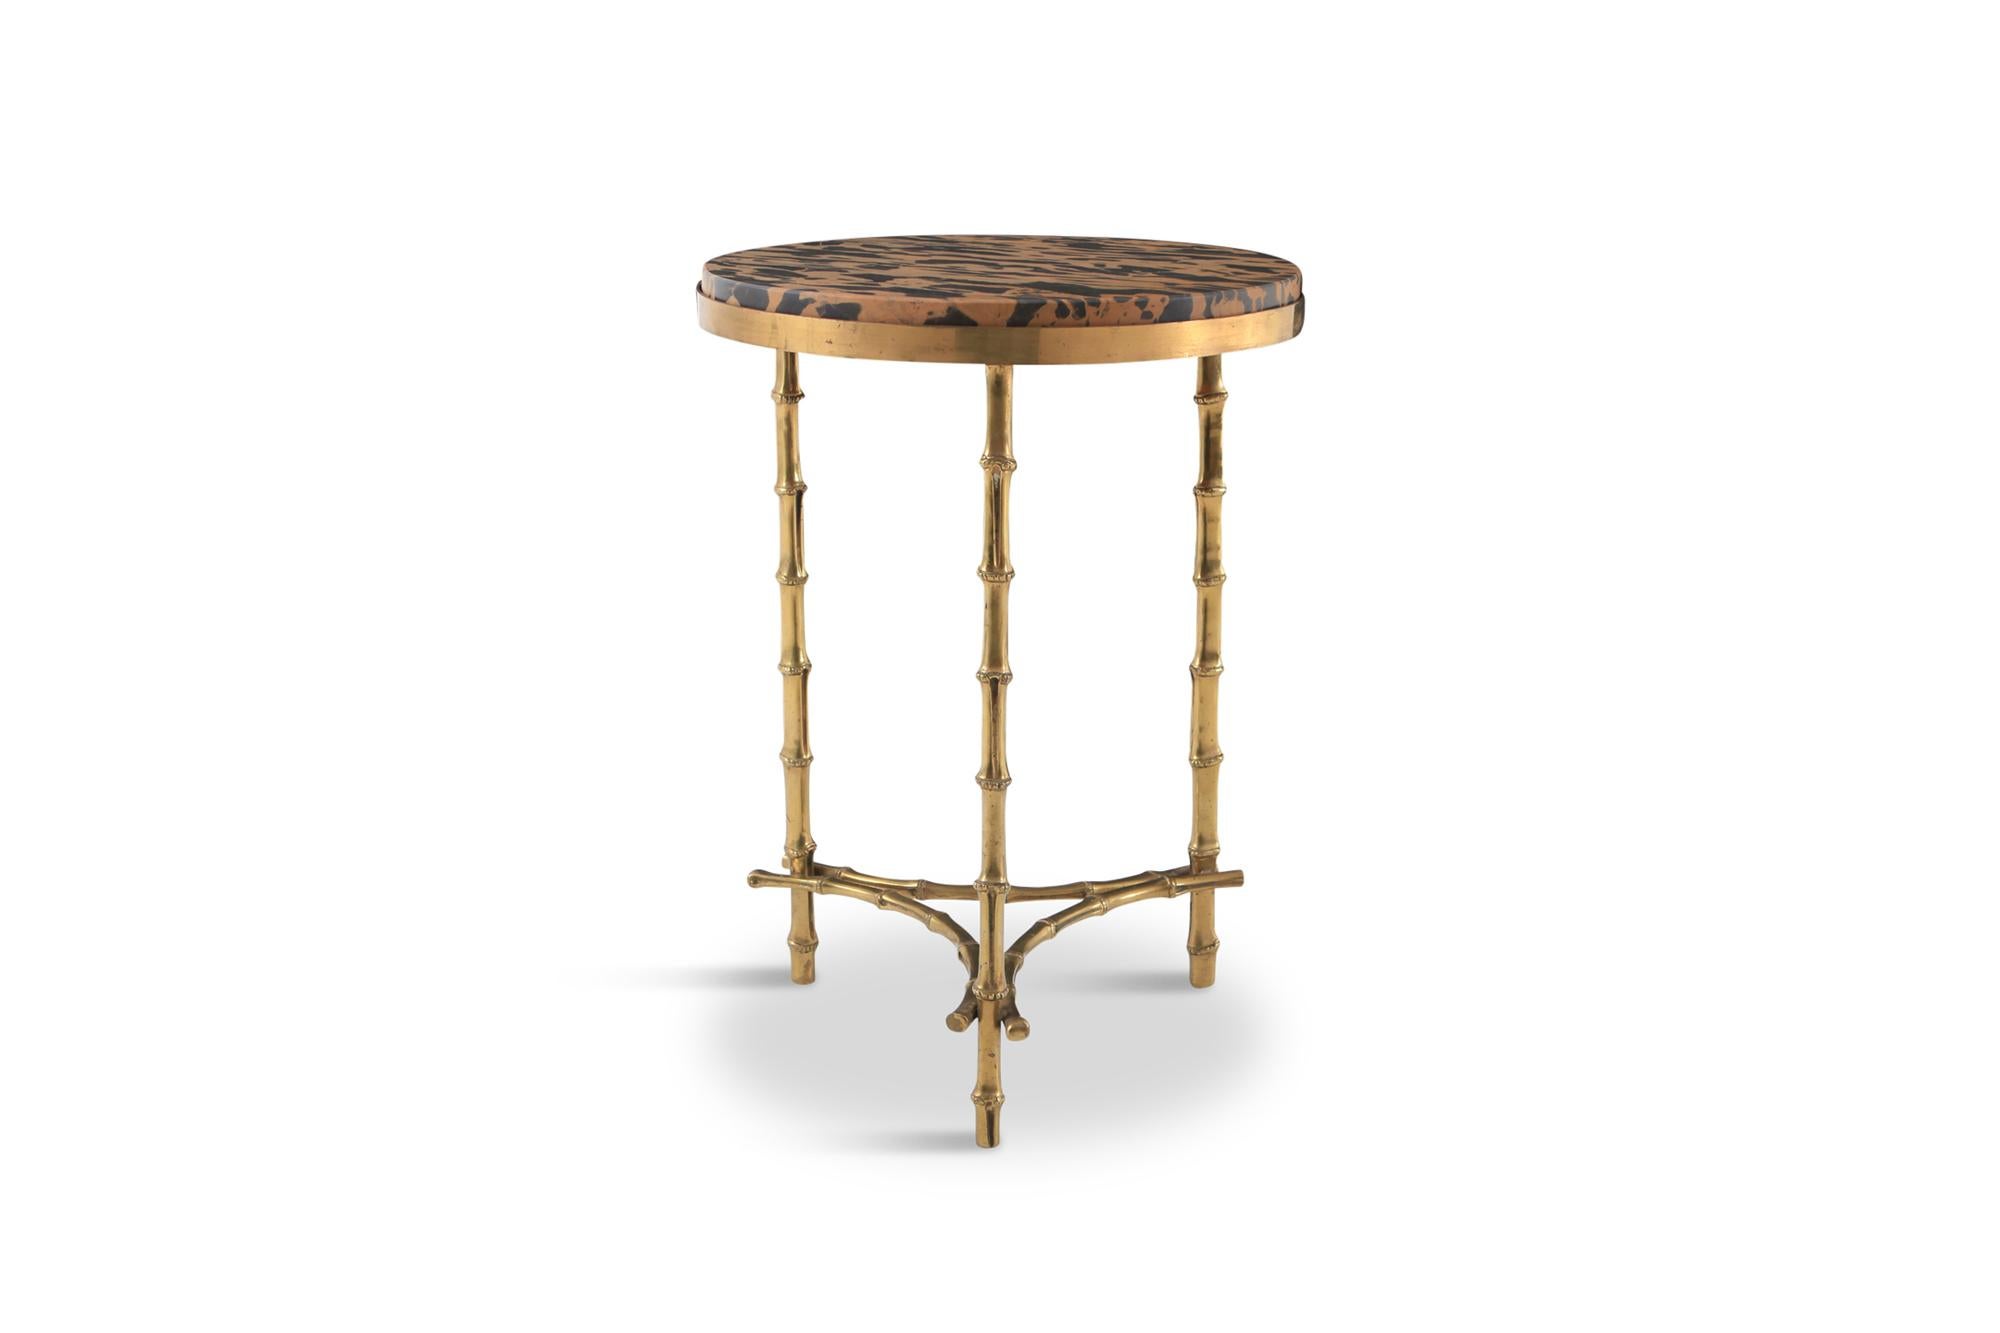 Mid-Century Modern brass bamboo side table by Maison Baguès, France, 1970s
Leopard like marble top.

Stunning piece that fits well in an eclectic Hollywood Regency inspired metropolitan interior.